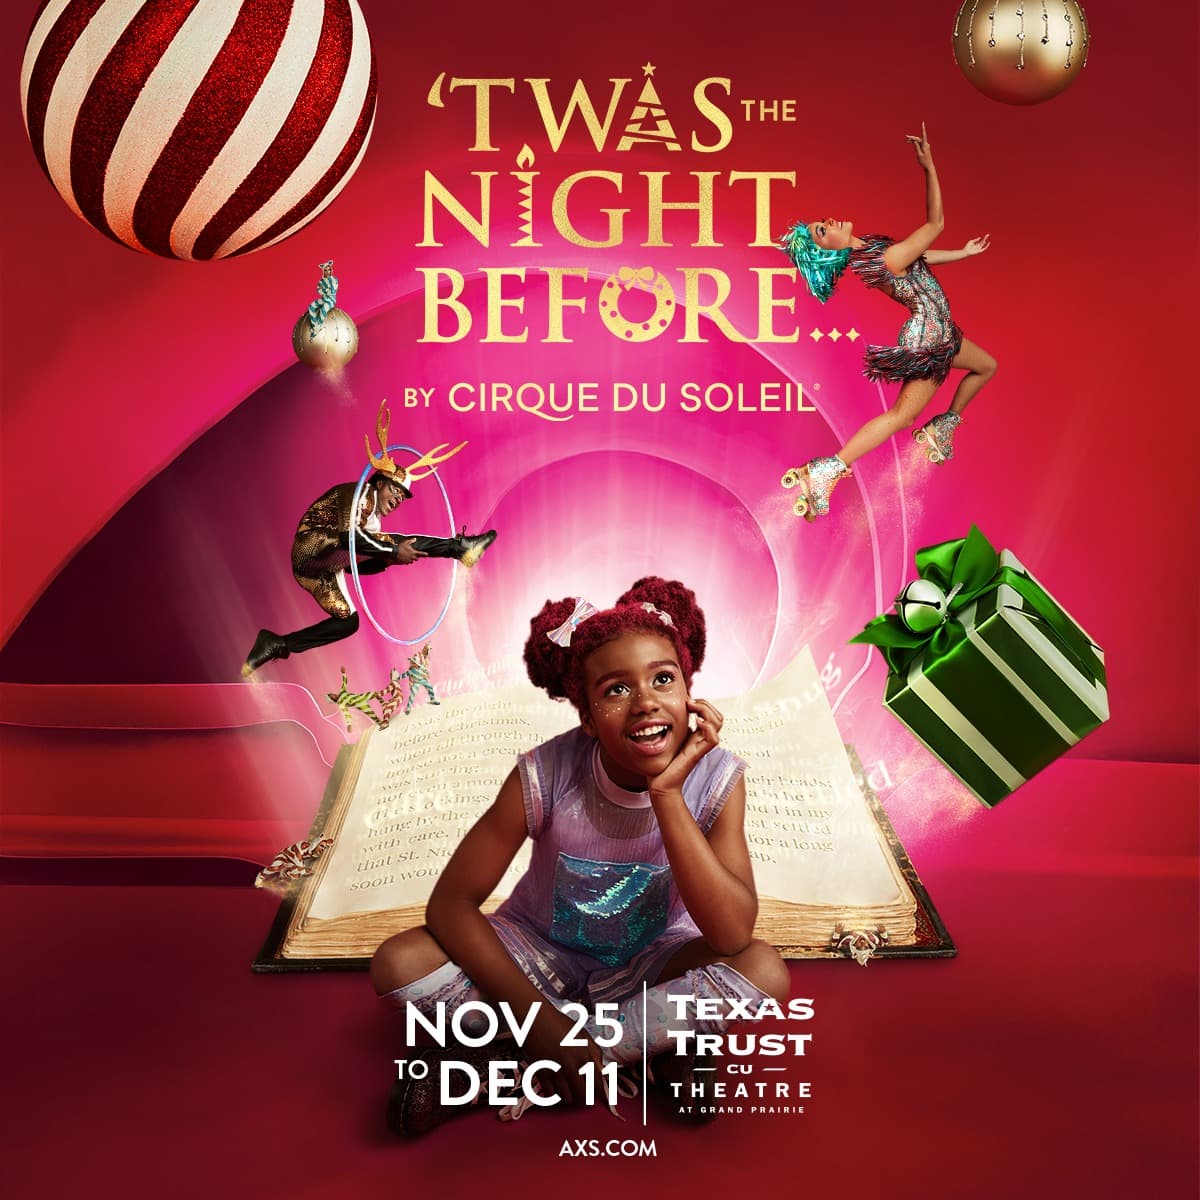 Cirque du soleil taws the night before poster